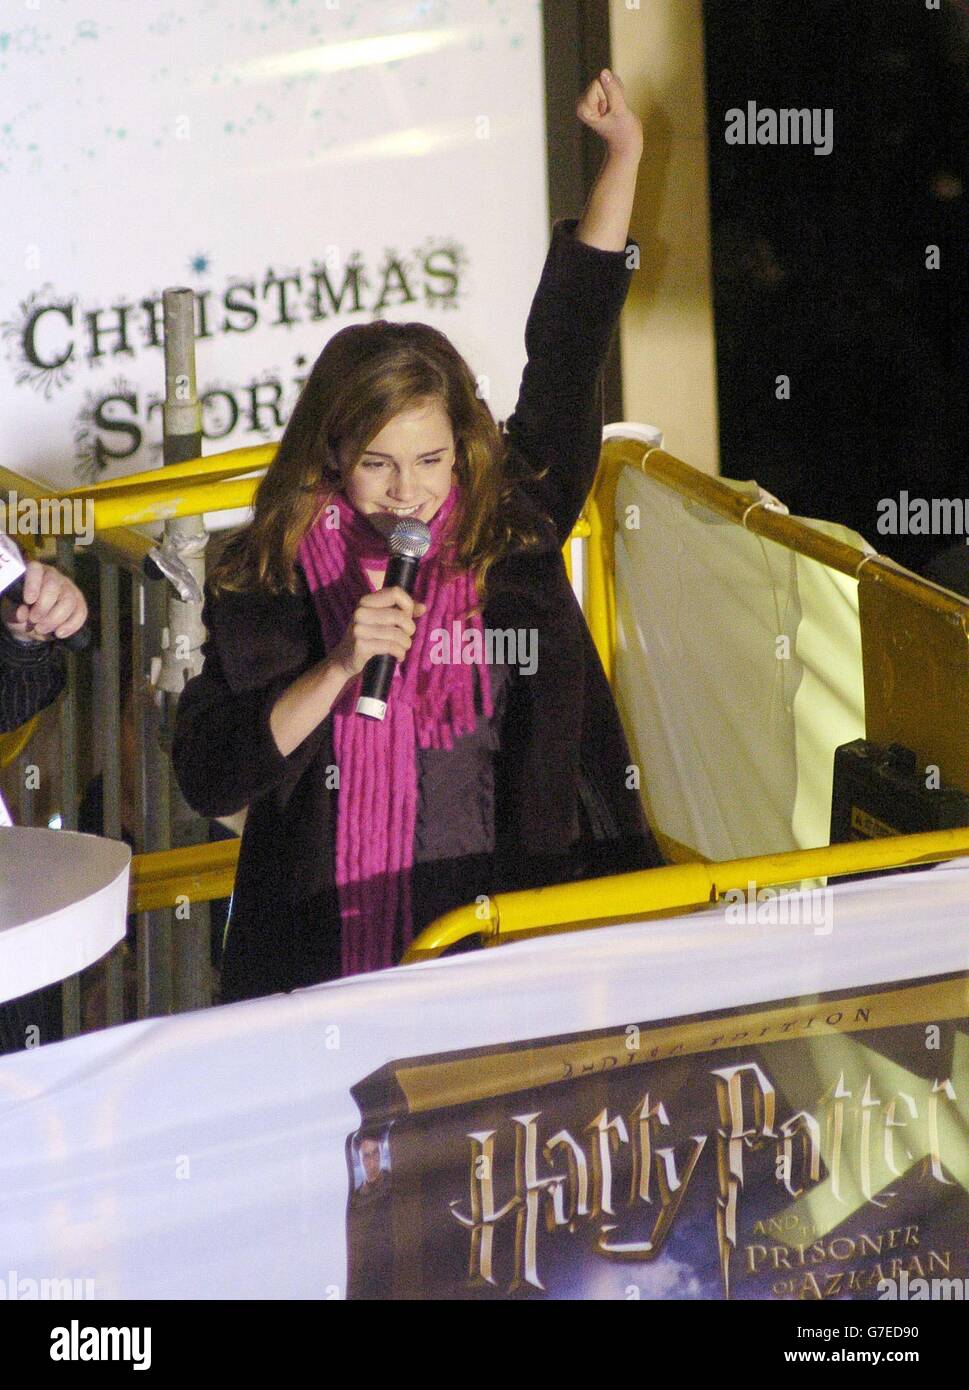 Teenage actress Emma Watson, who plays Hermione Grainger in the Harry Potter films, waves to the crowd in London's Oxford Street before helping to turn on the traditional Christmas lights. Stock Photo